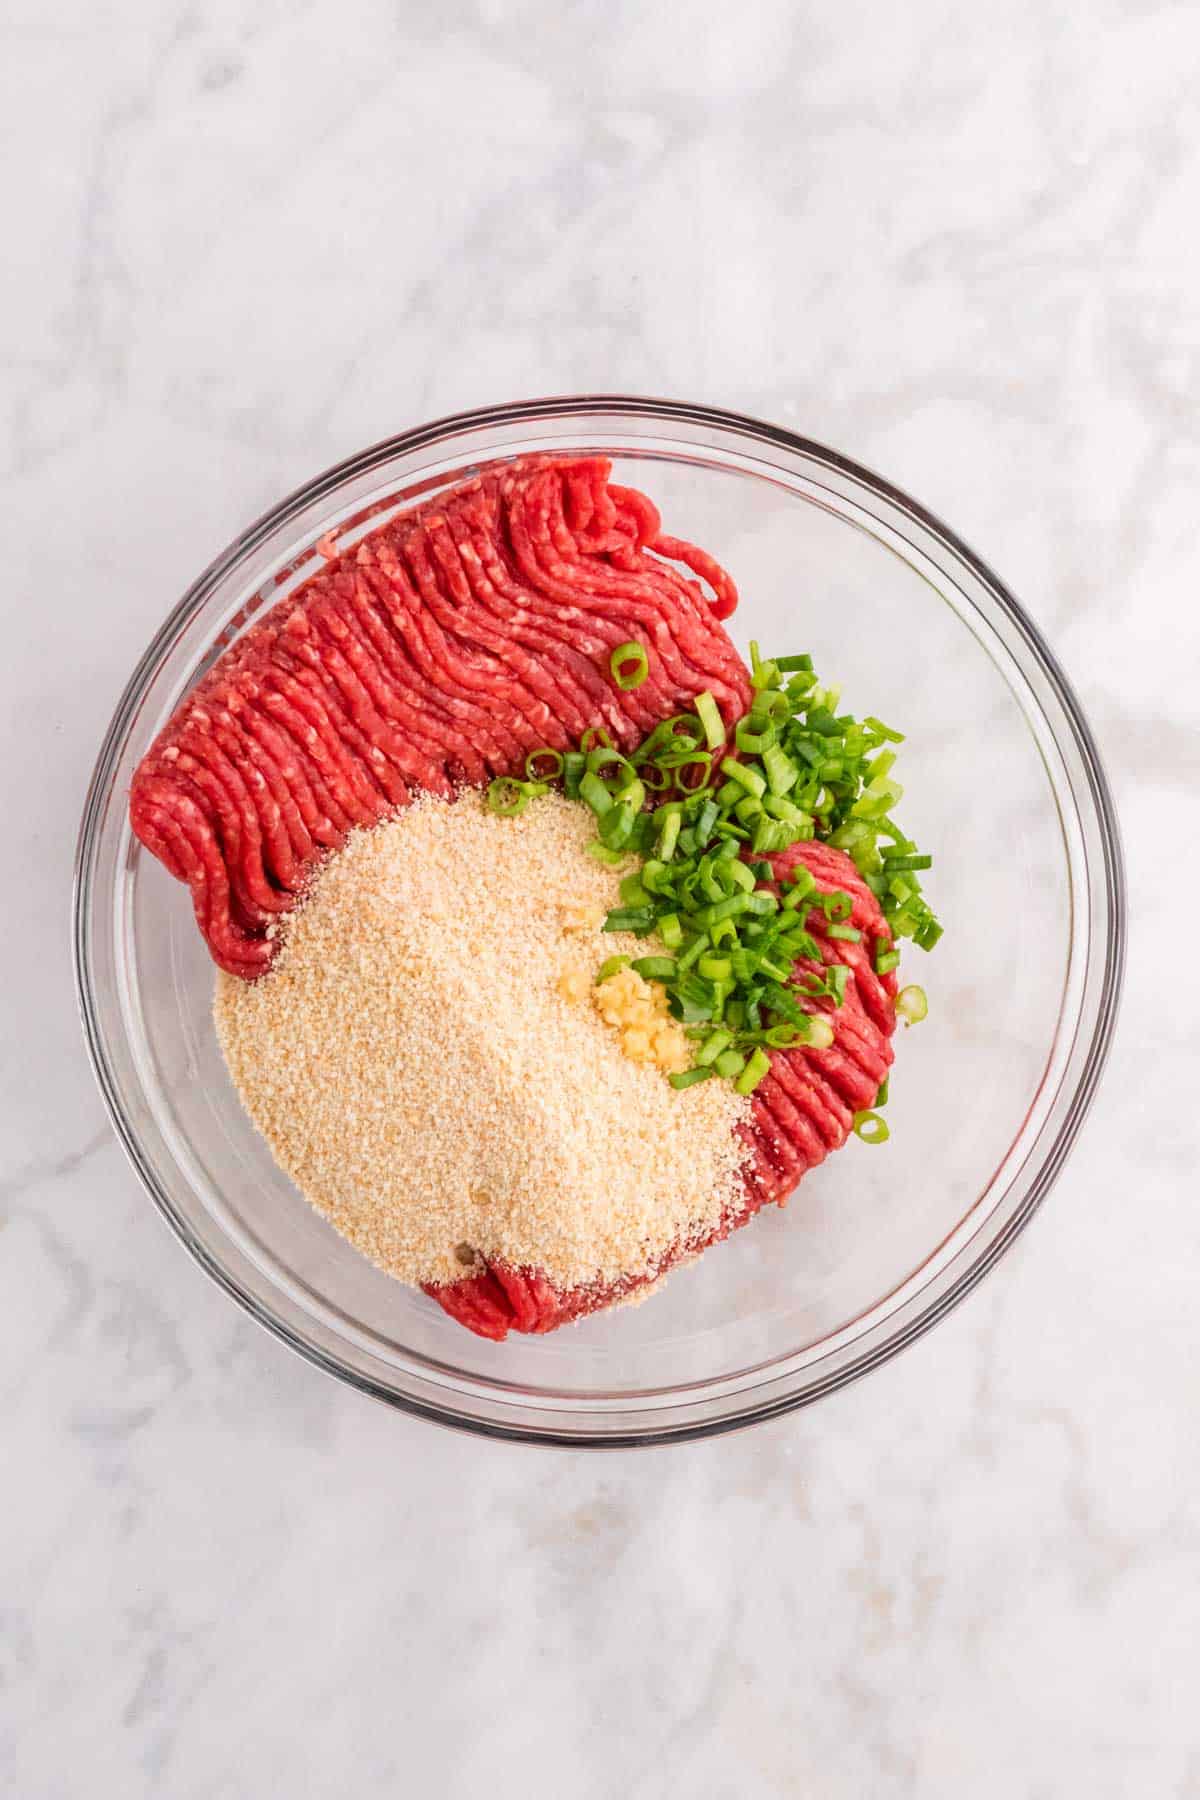 raw ground beef, bread crumbs, minced garlic and chopped green onions in a bowl